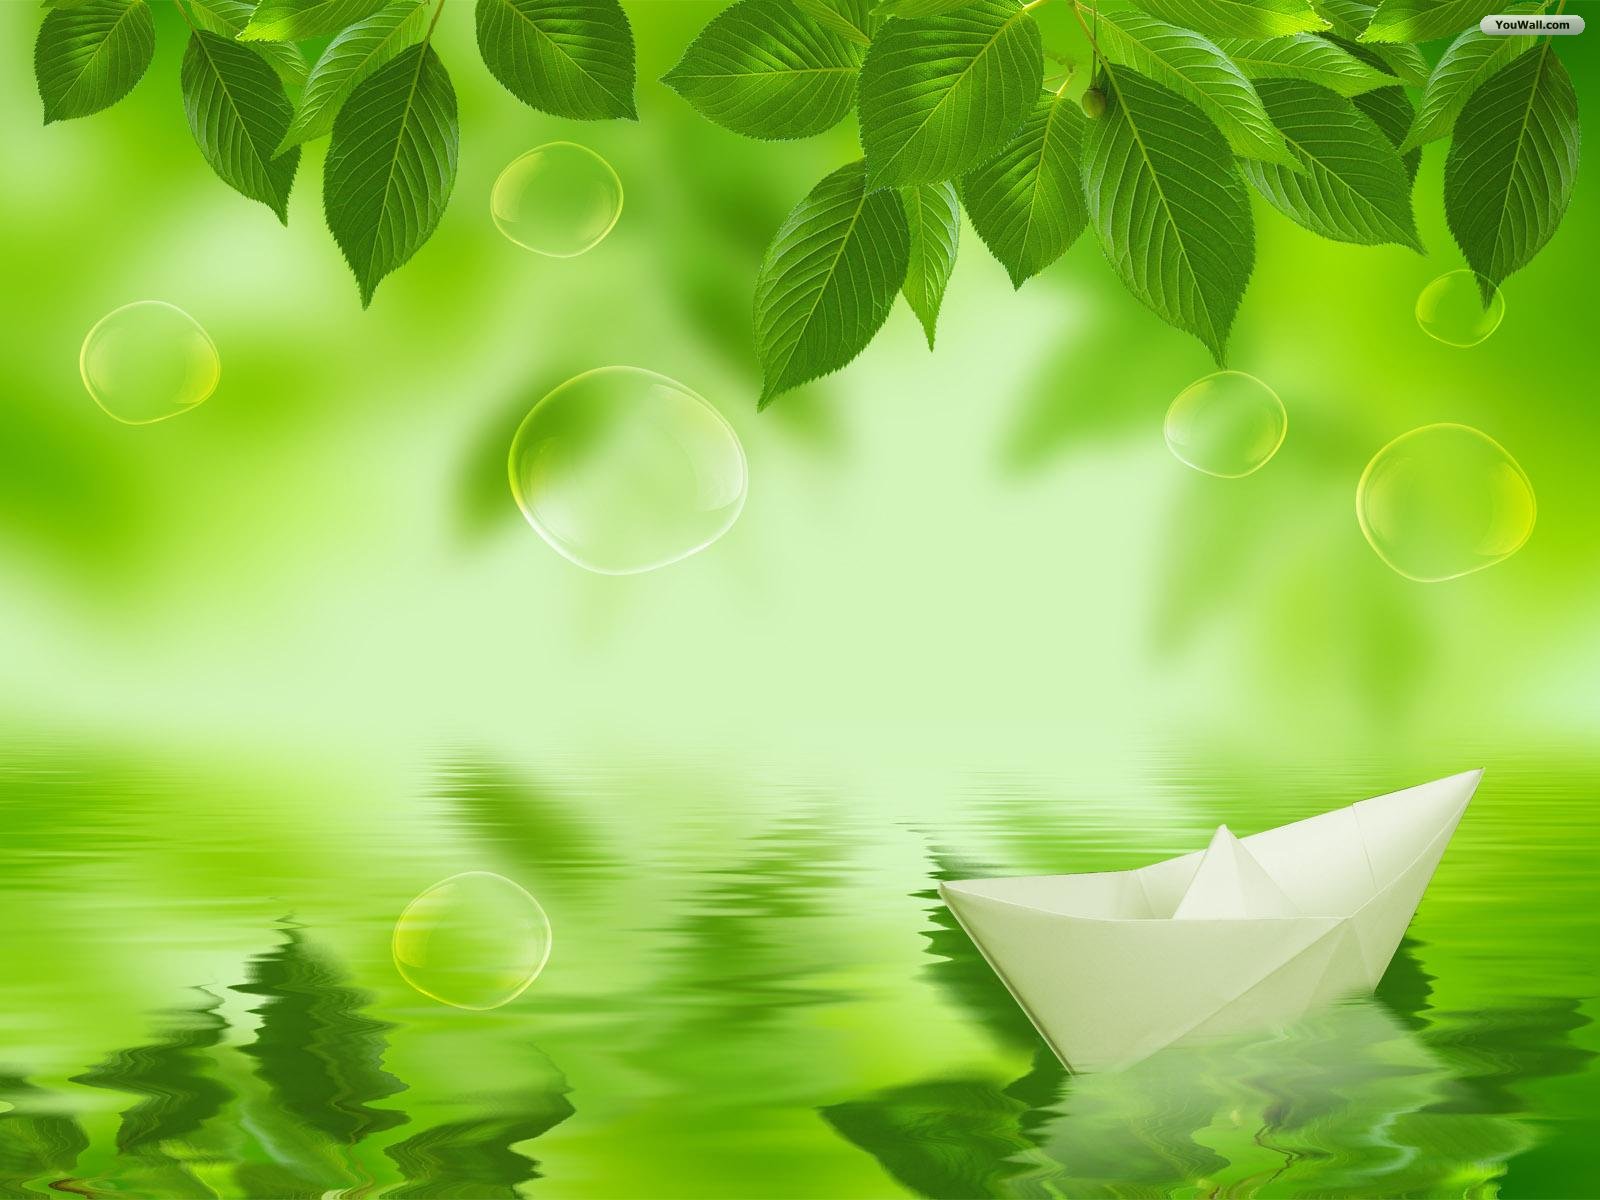 Green Leaves Wallpaper Background Pictures In High